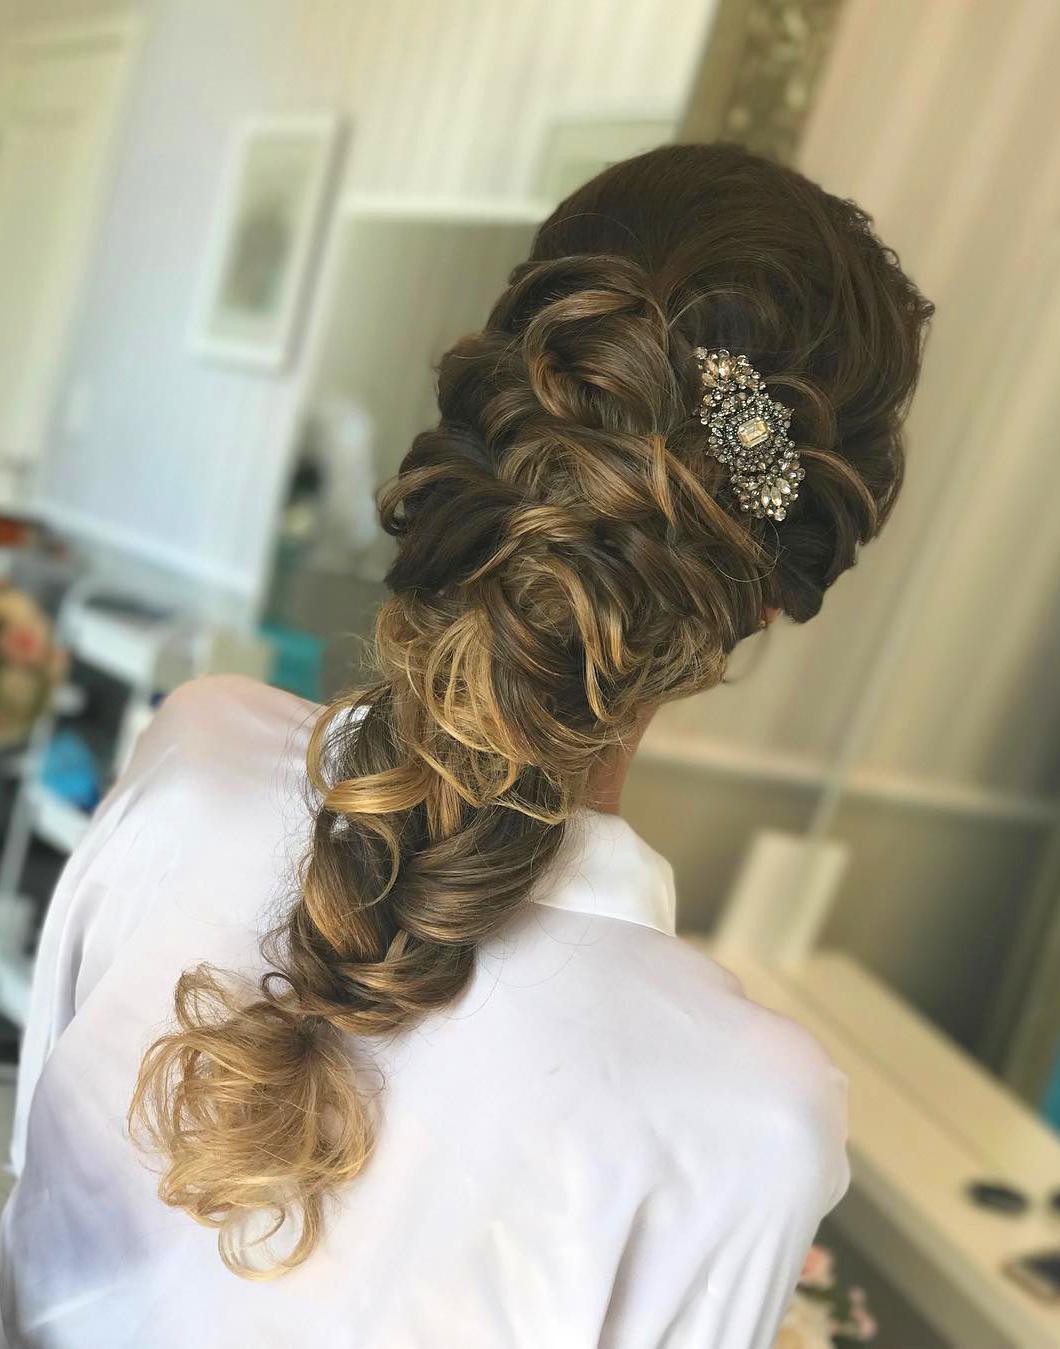 30+ Beautiful Hairstyles For Women: Casual And Prom Looks